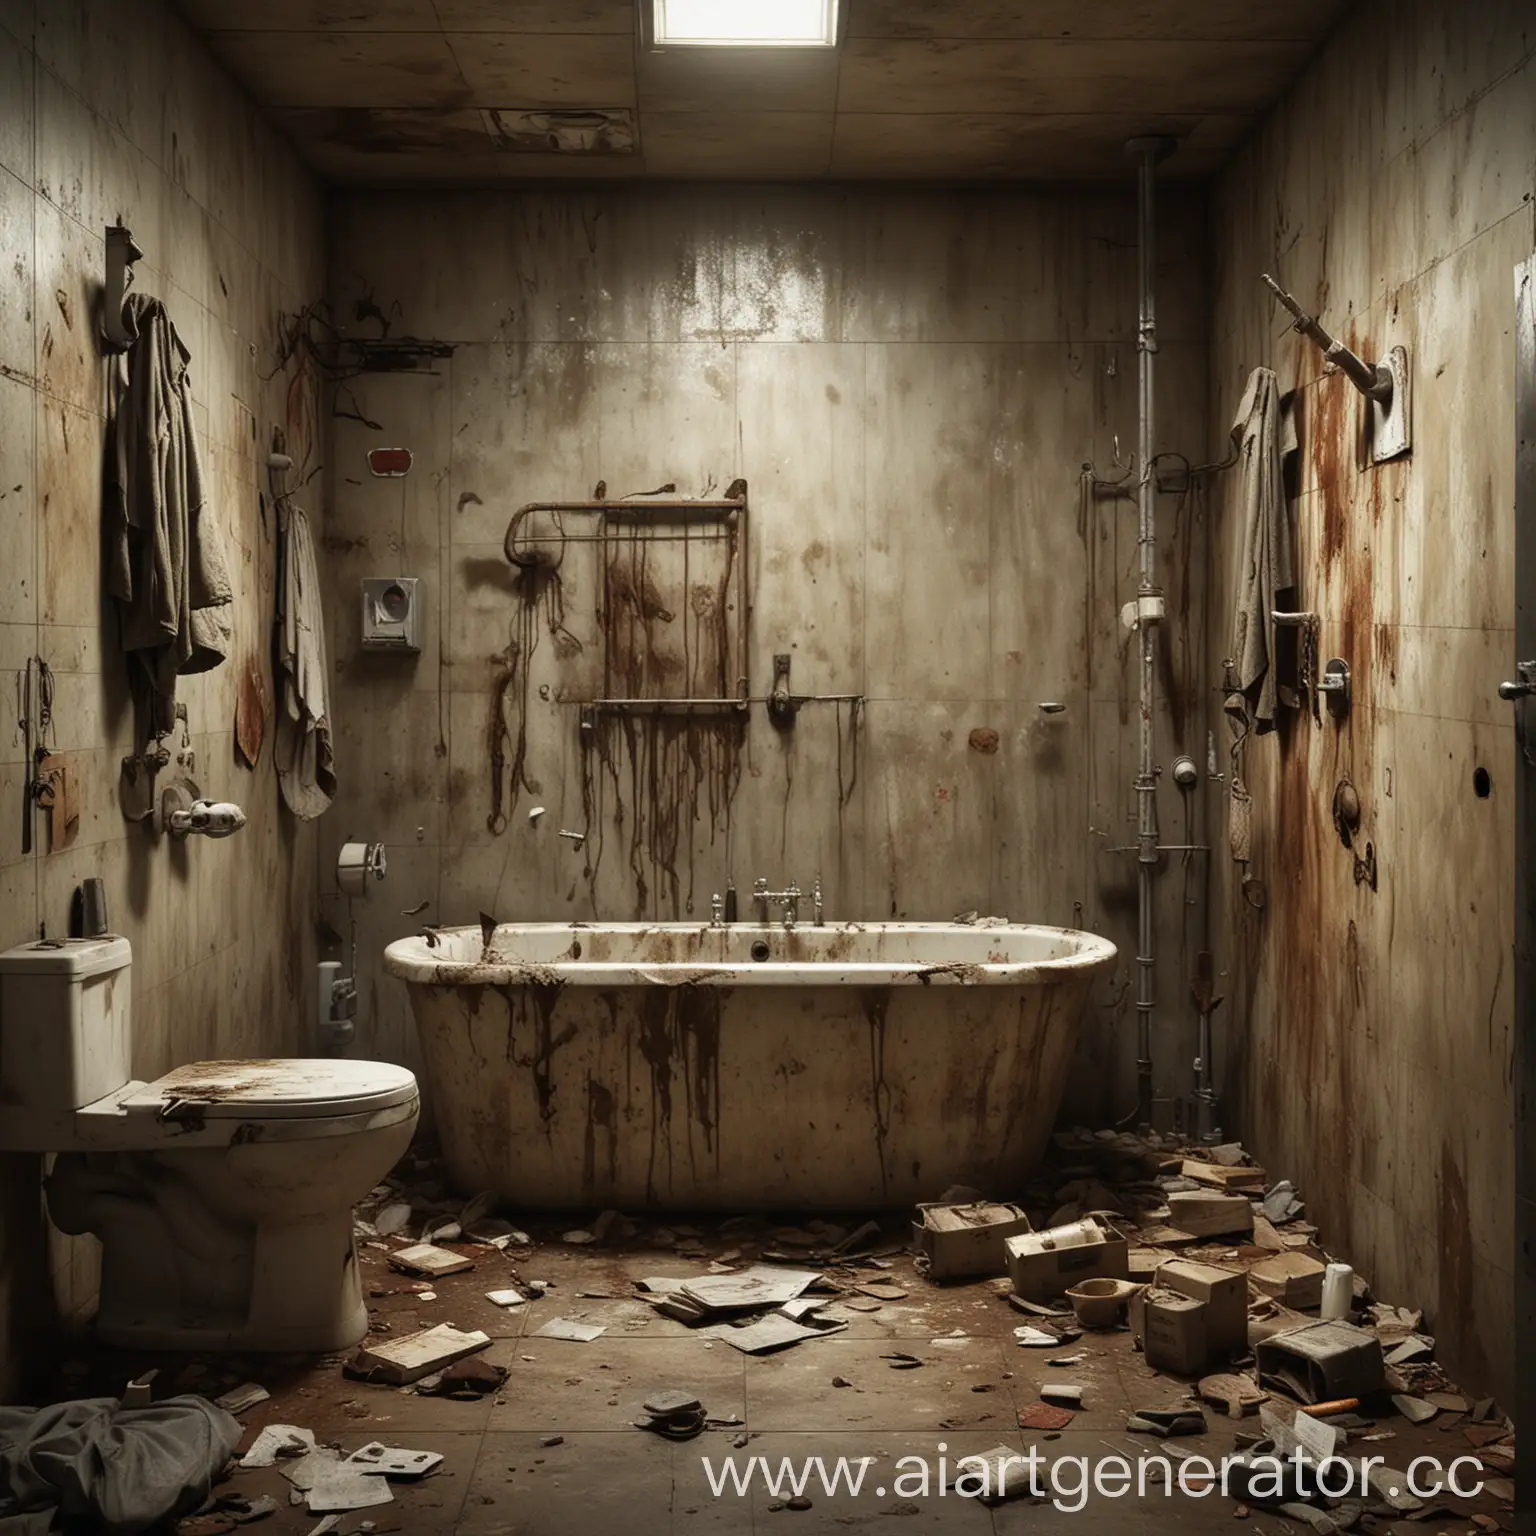 One of the deadly sins in a post-apocalyptic world lies in the bathroom